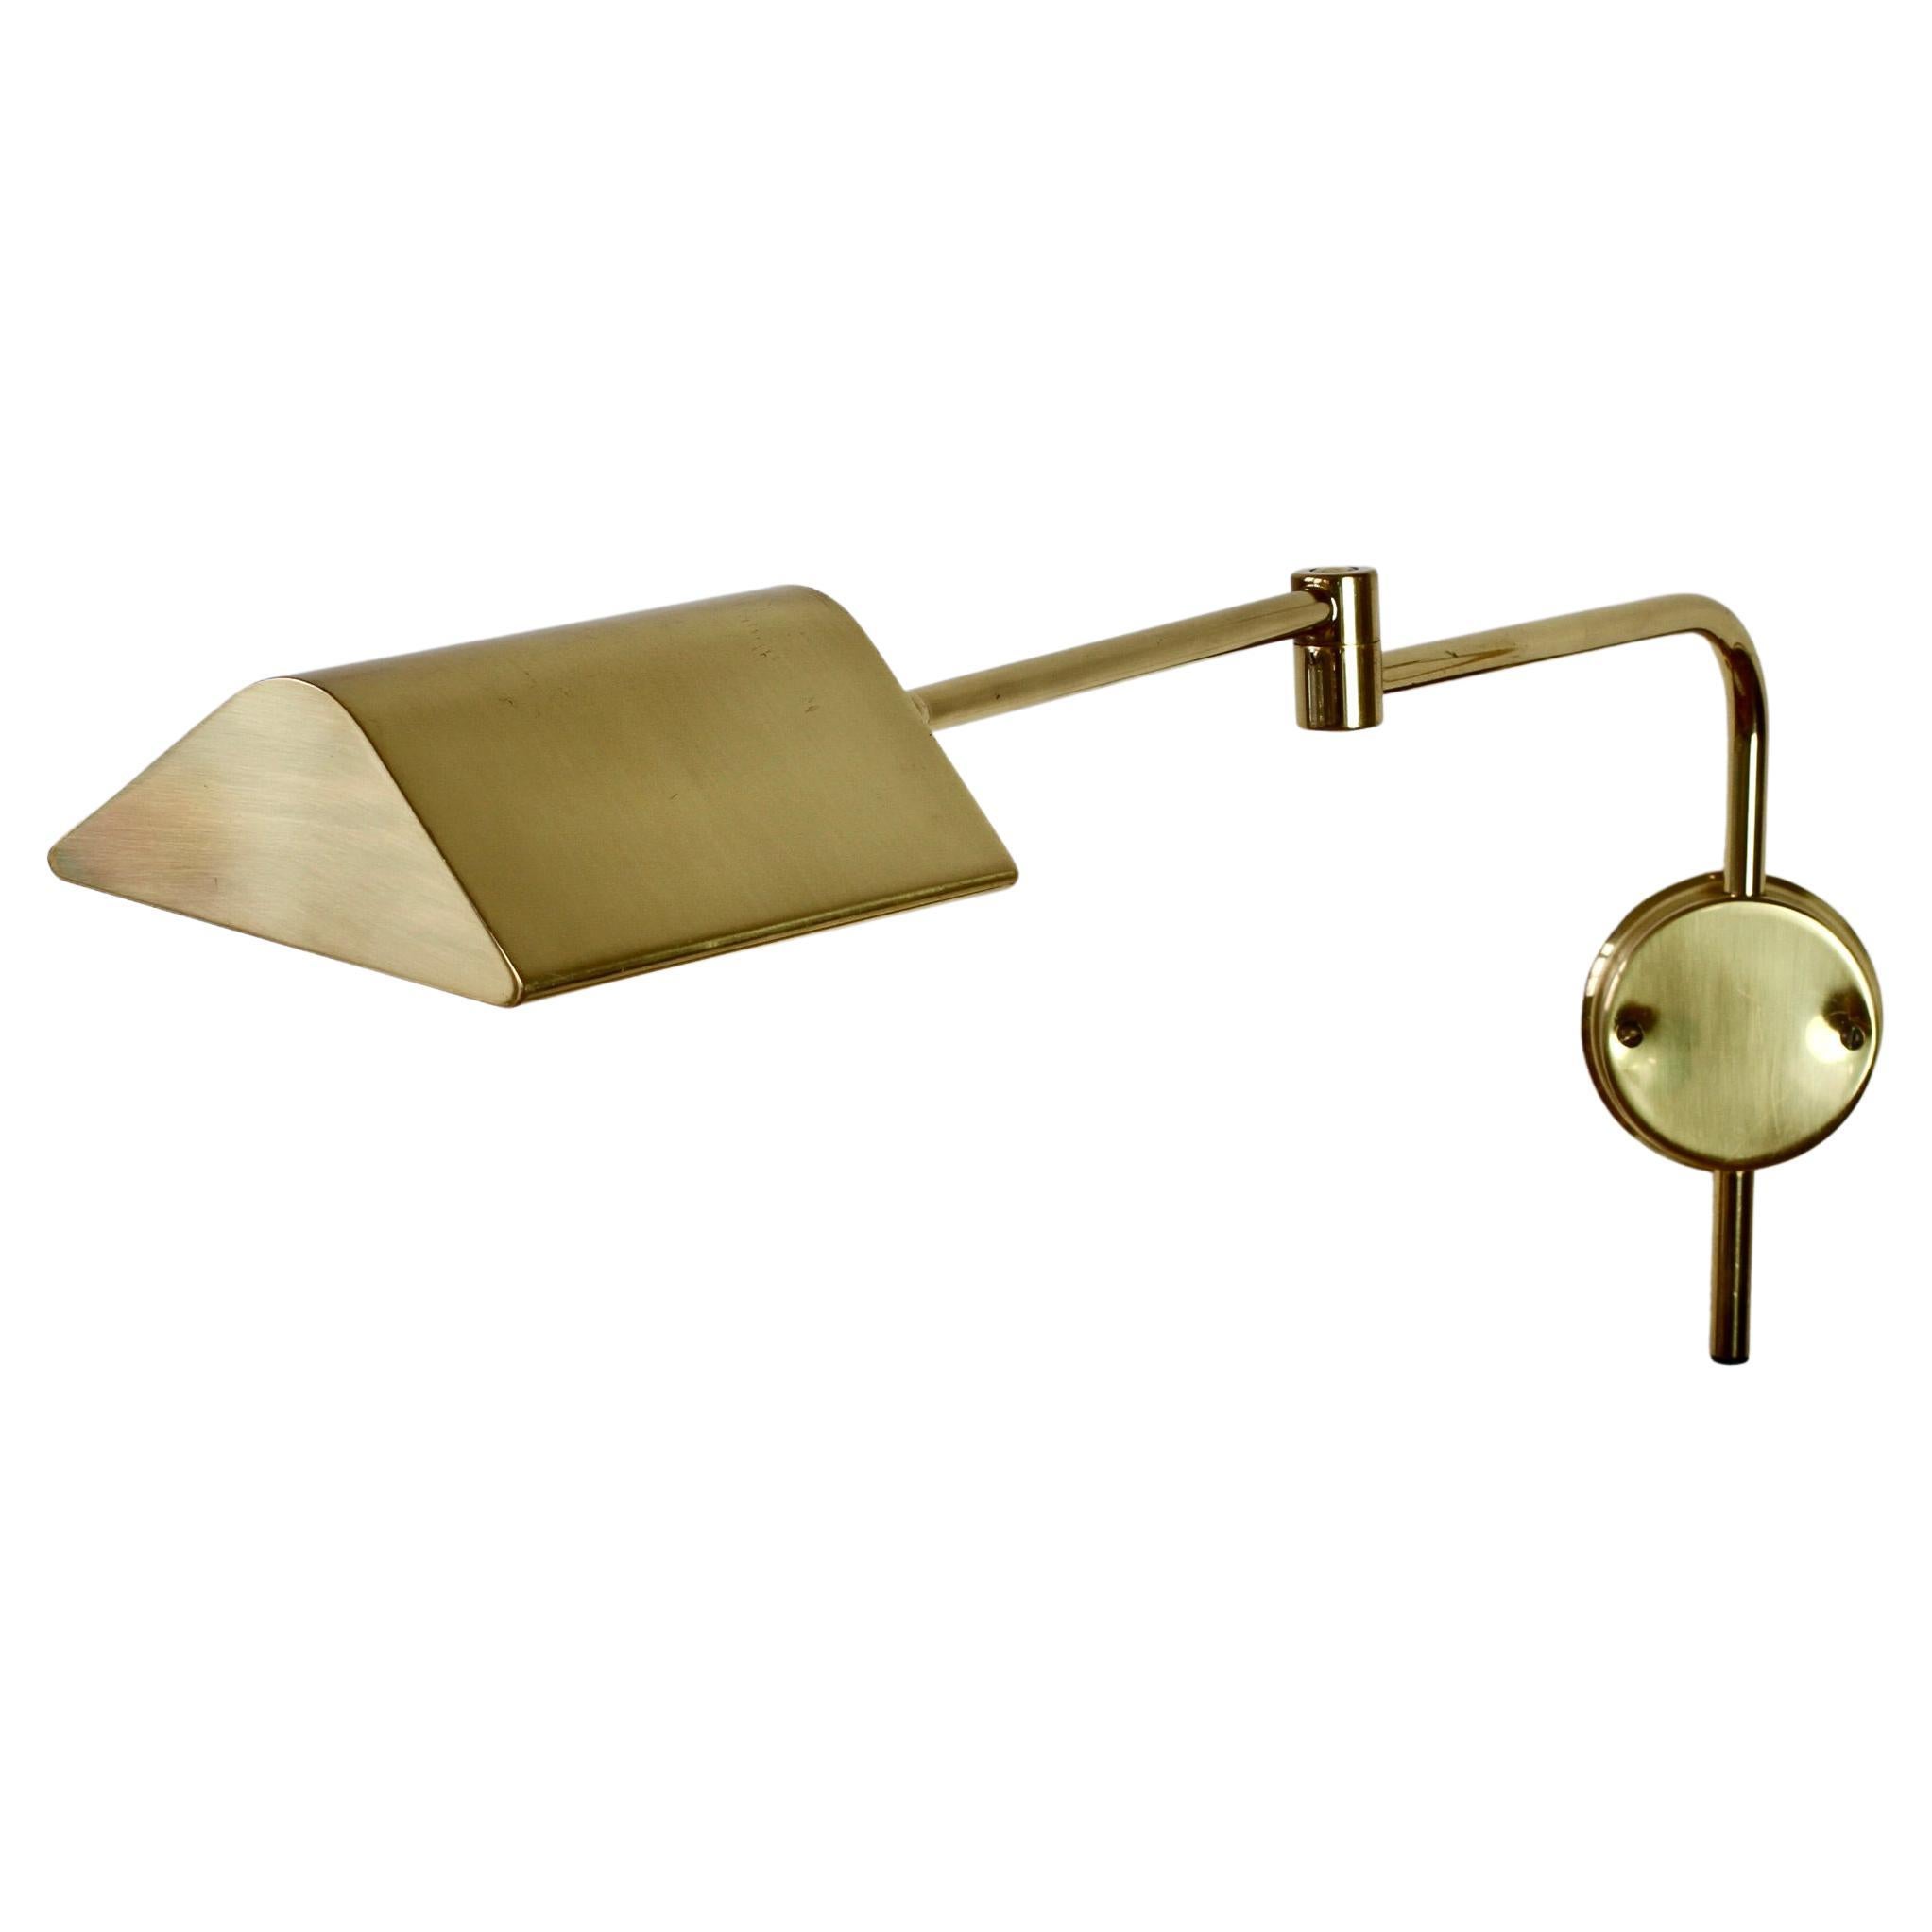 Rare Mid-Century Modern vintage German adjustable wall mounted reading lamp, light or sconce by Florian Schulz circa late 1970s -early 1980s. Featuring polished brass (now with age related patina) and fully adjustable lampshade and pivoting arm